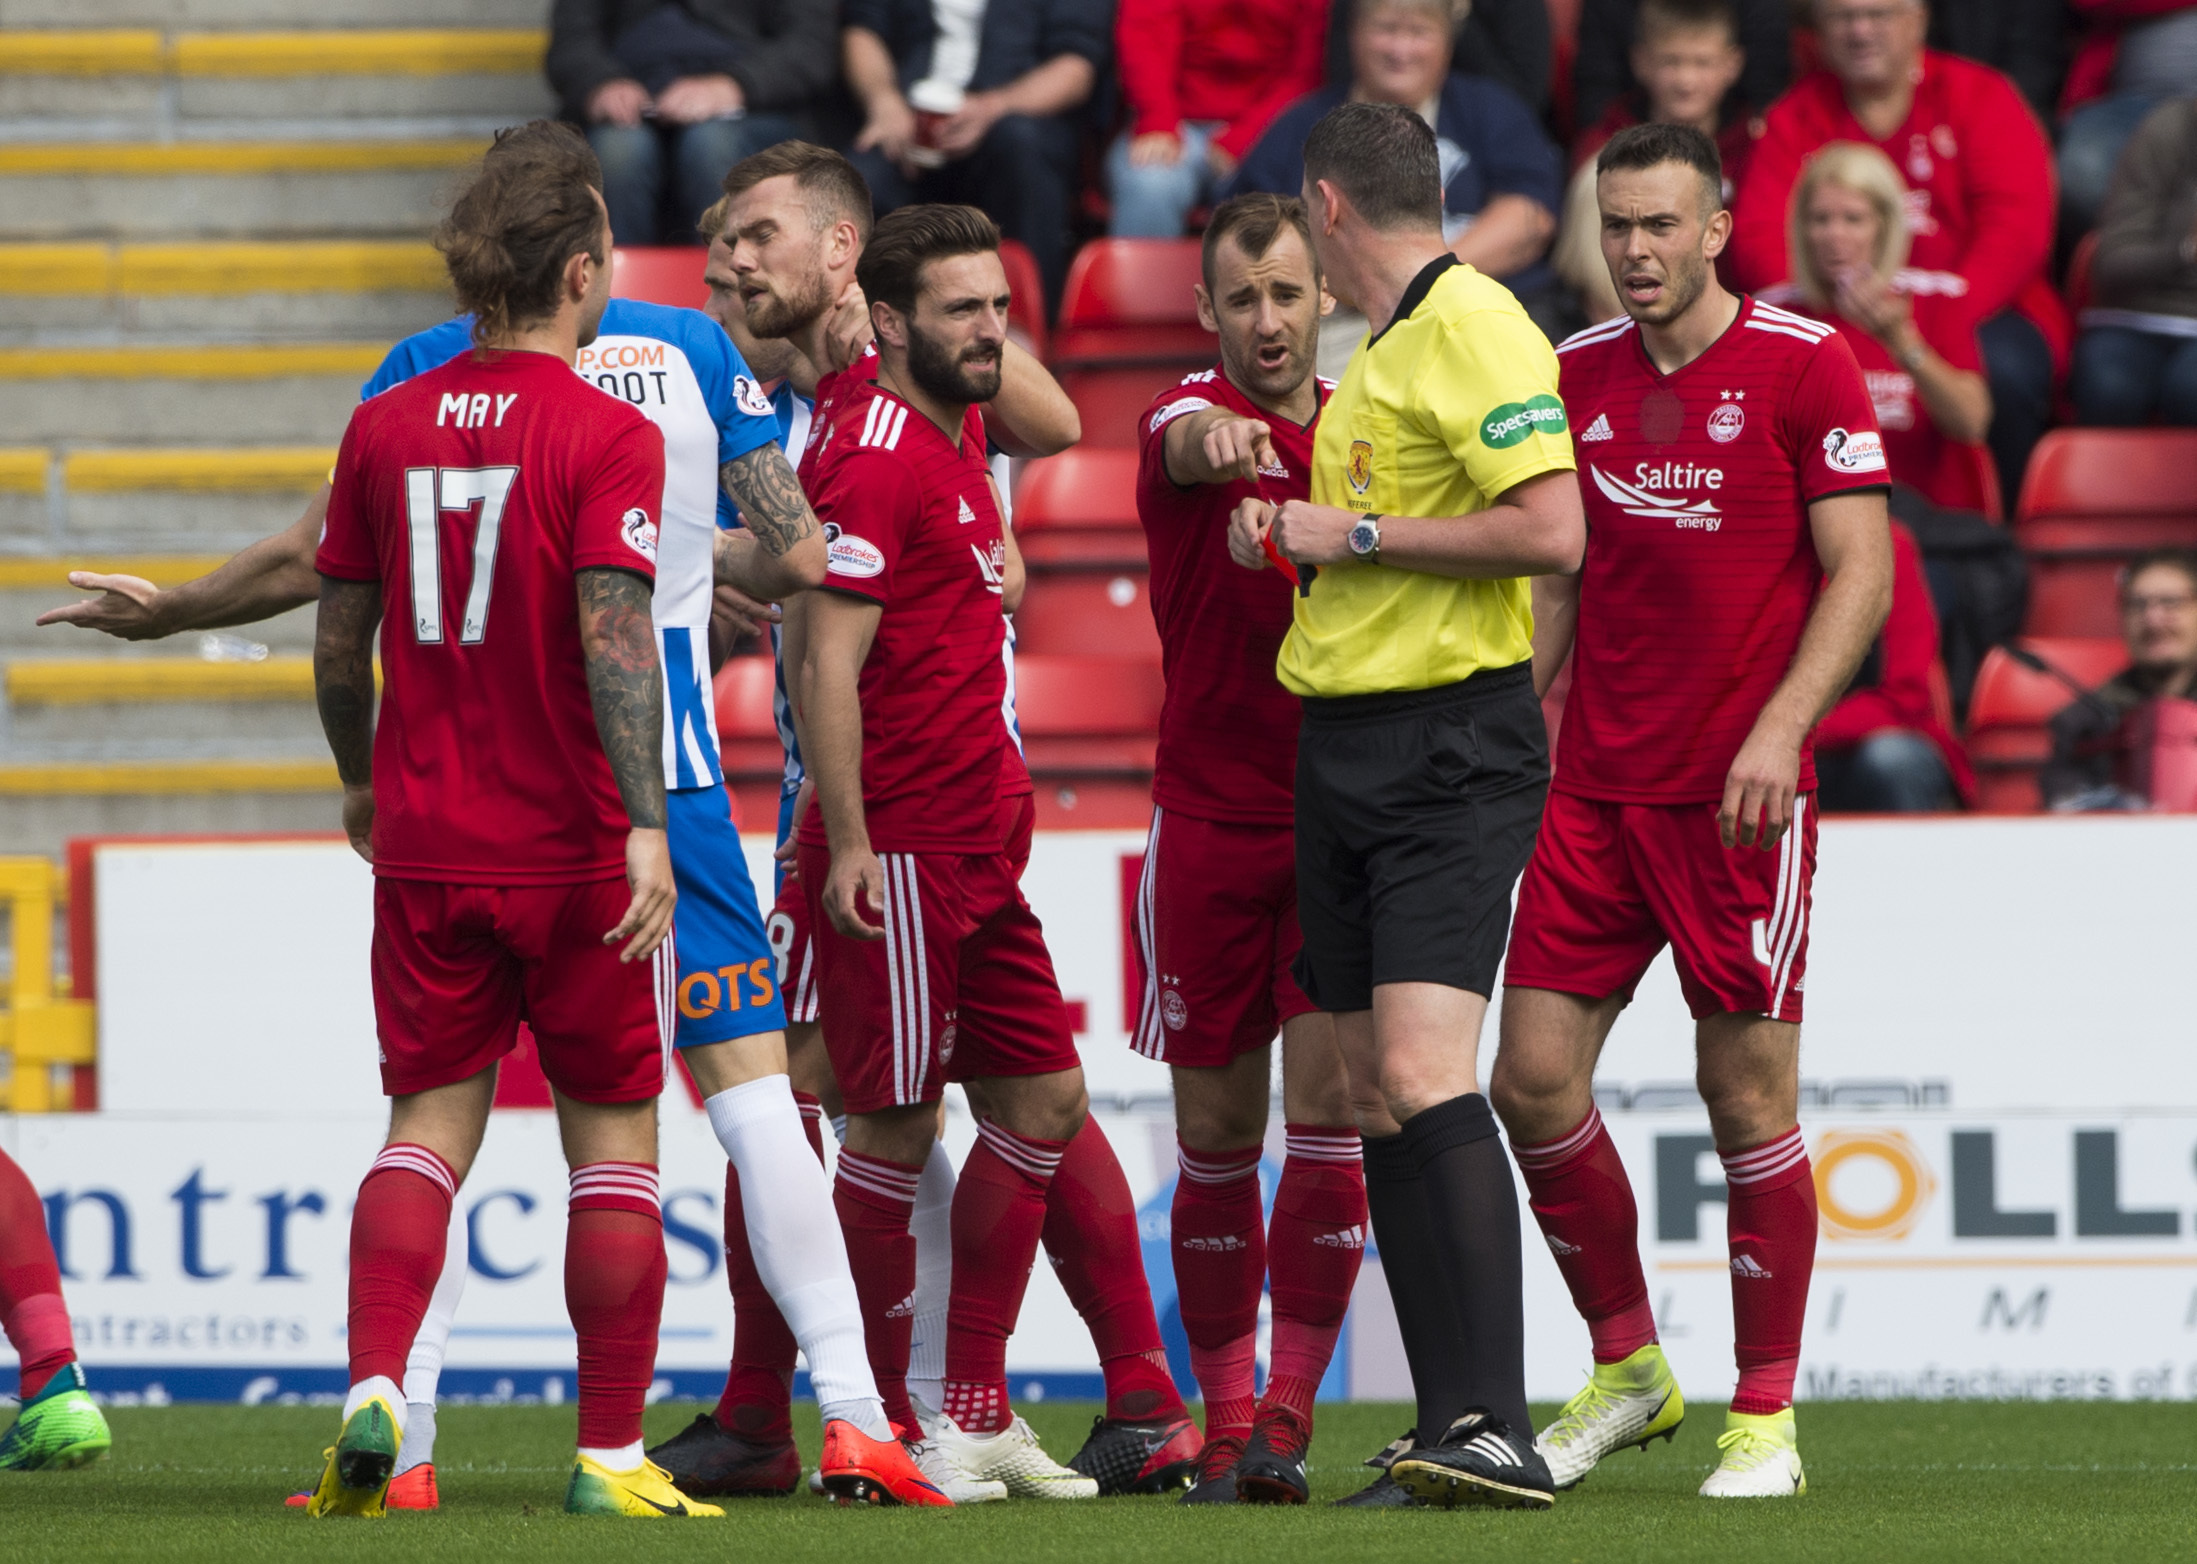 Mikey Devlin was sent off for a foul on Eamonn Brophy against Kilmarnock.